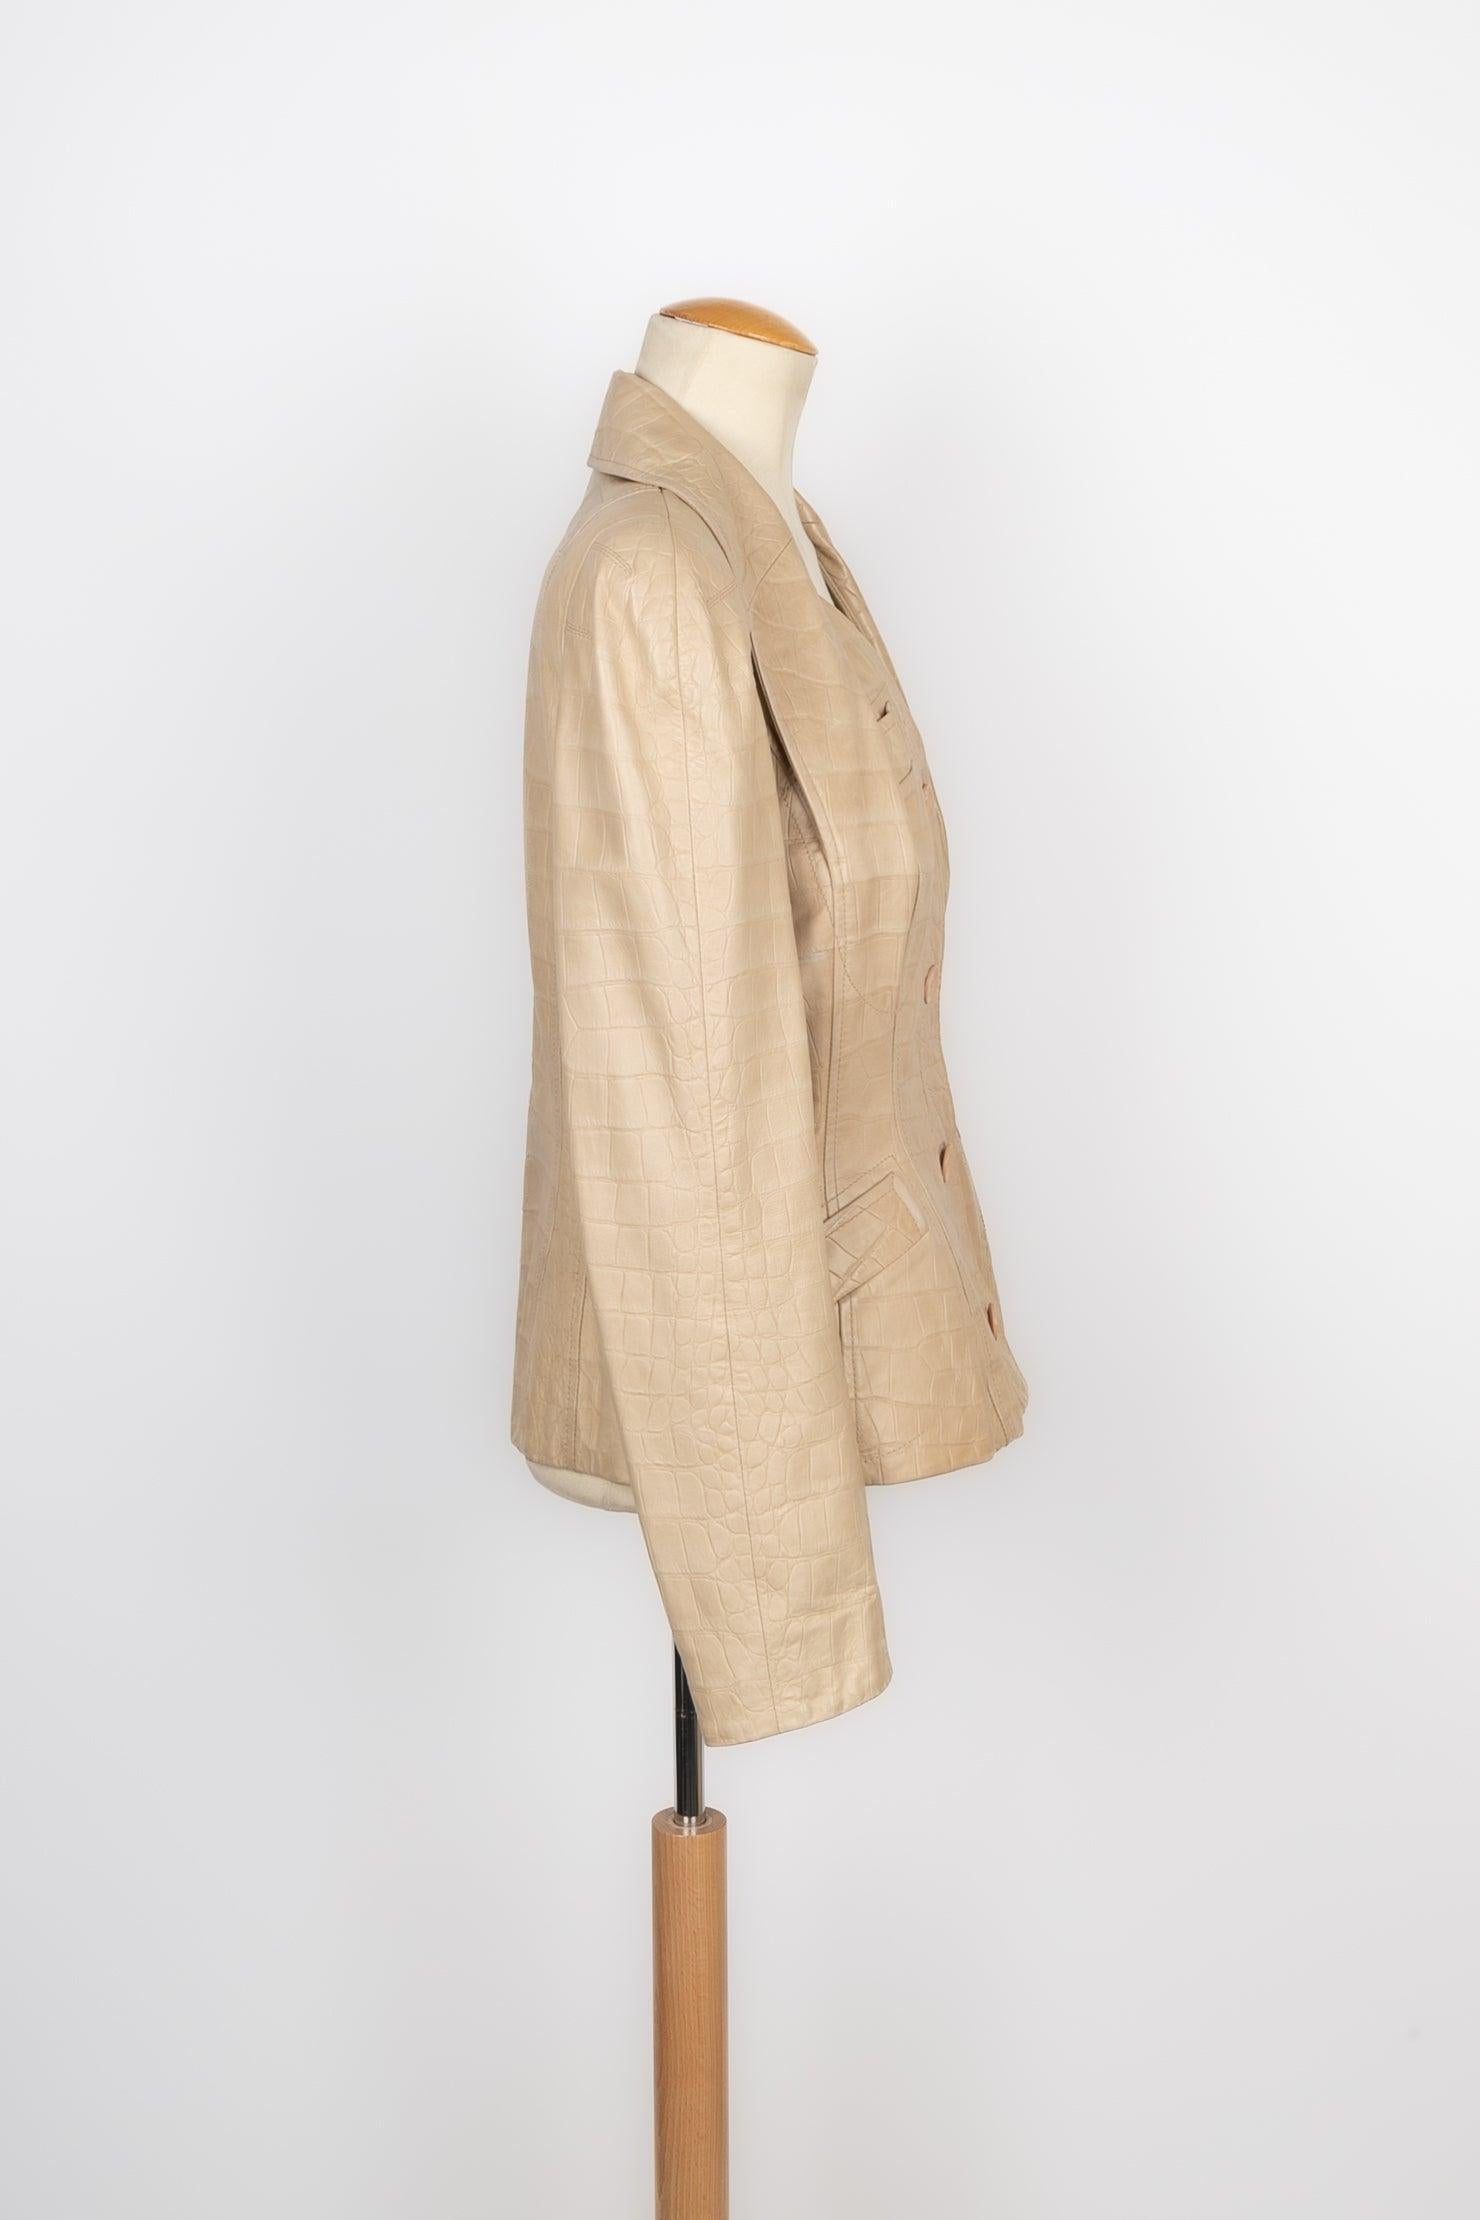 Women's Dior Lamb Leather Jacket with Crocodile Print in Beige Tones, 2005 For Sale